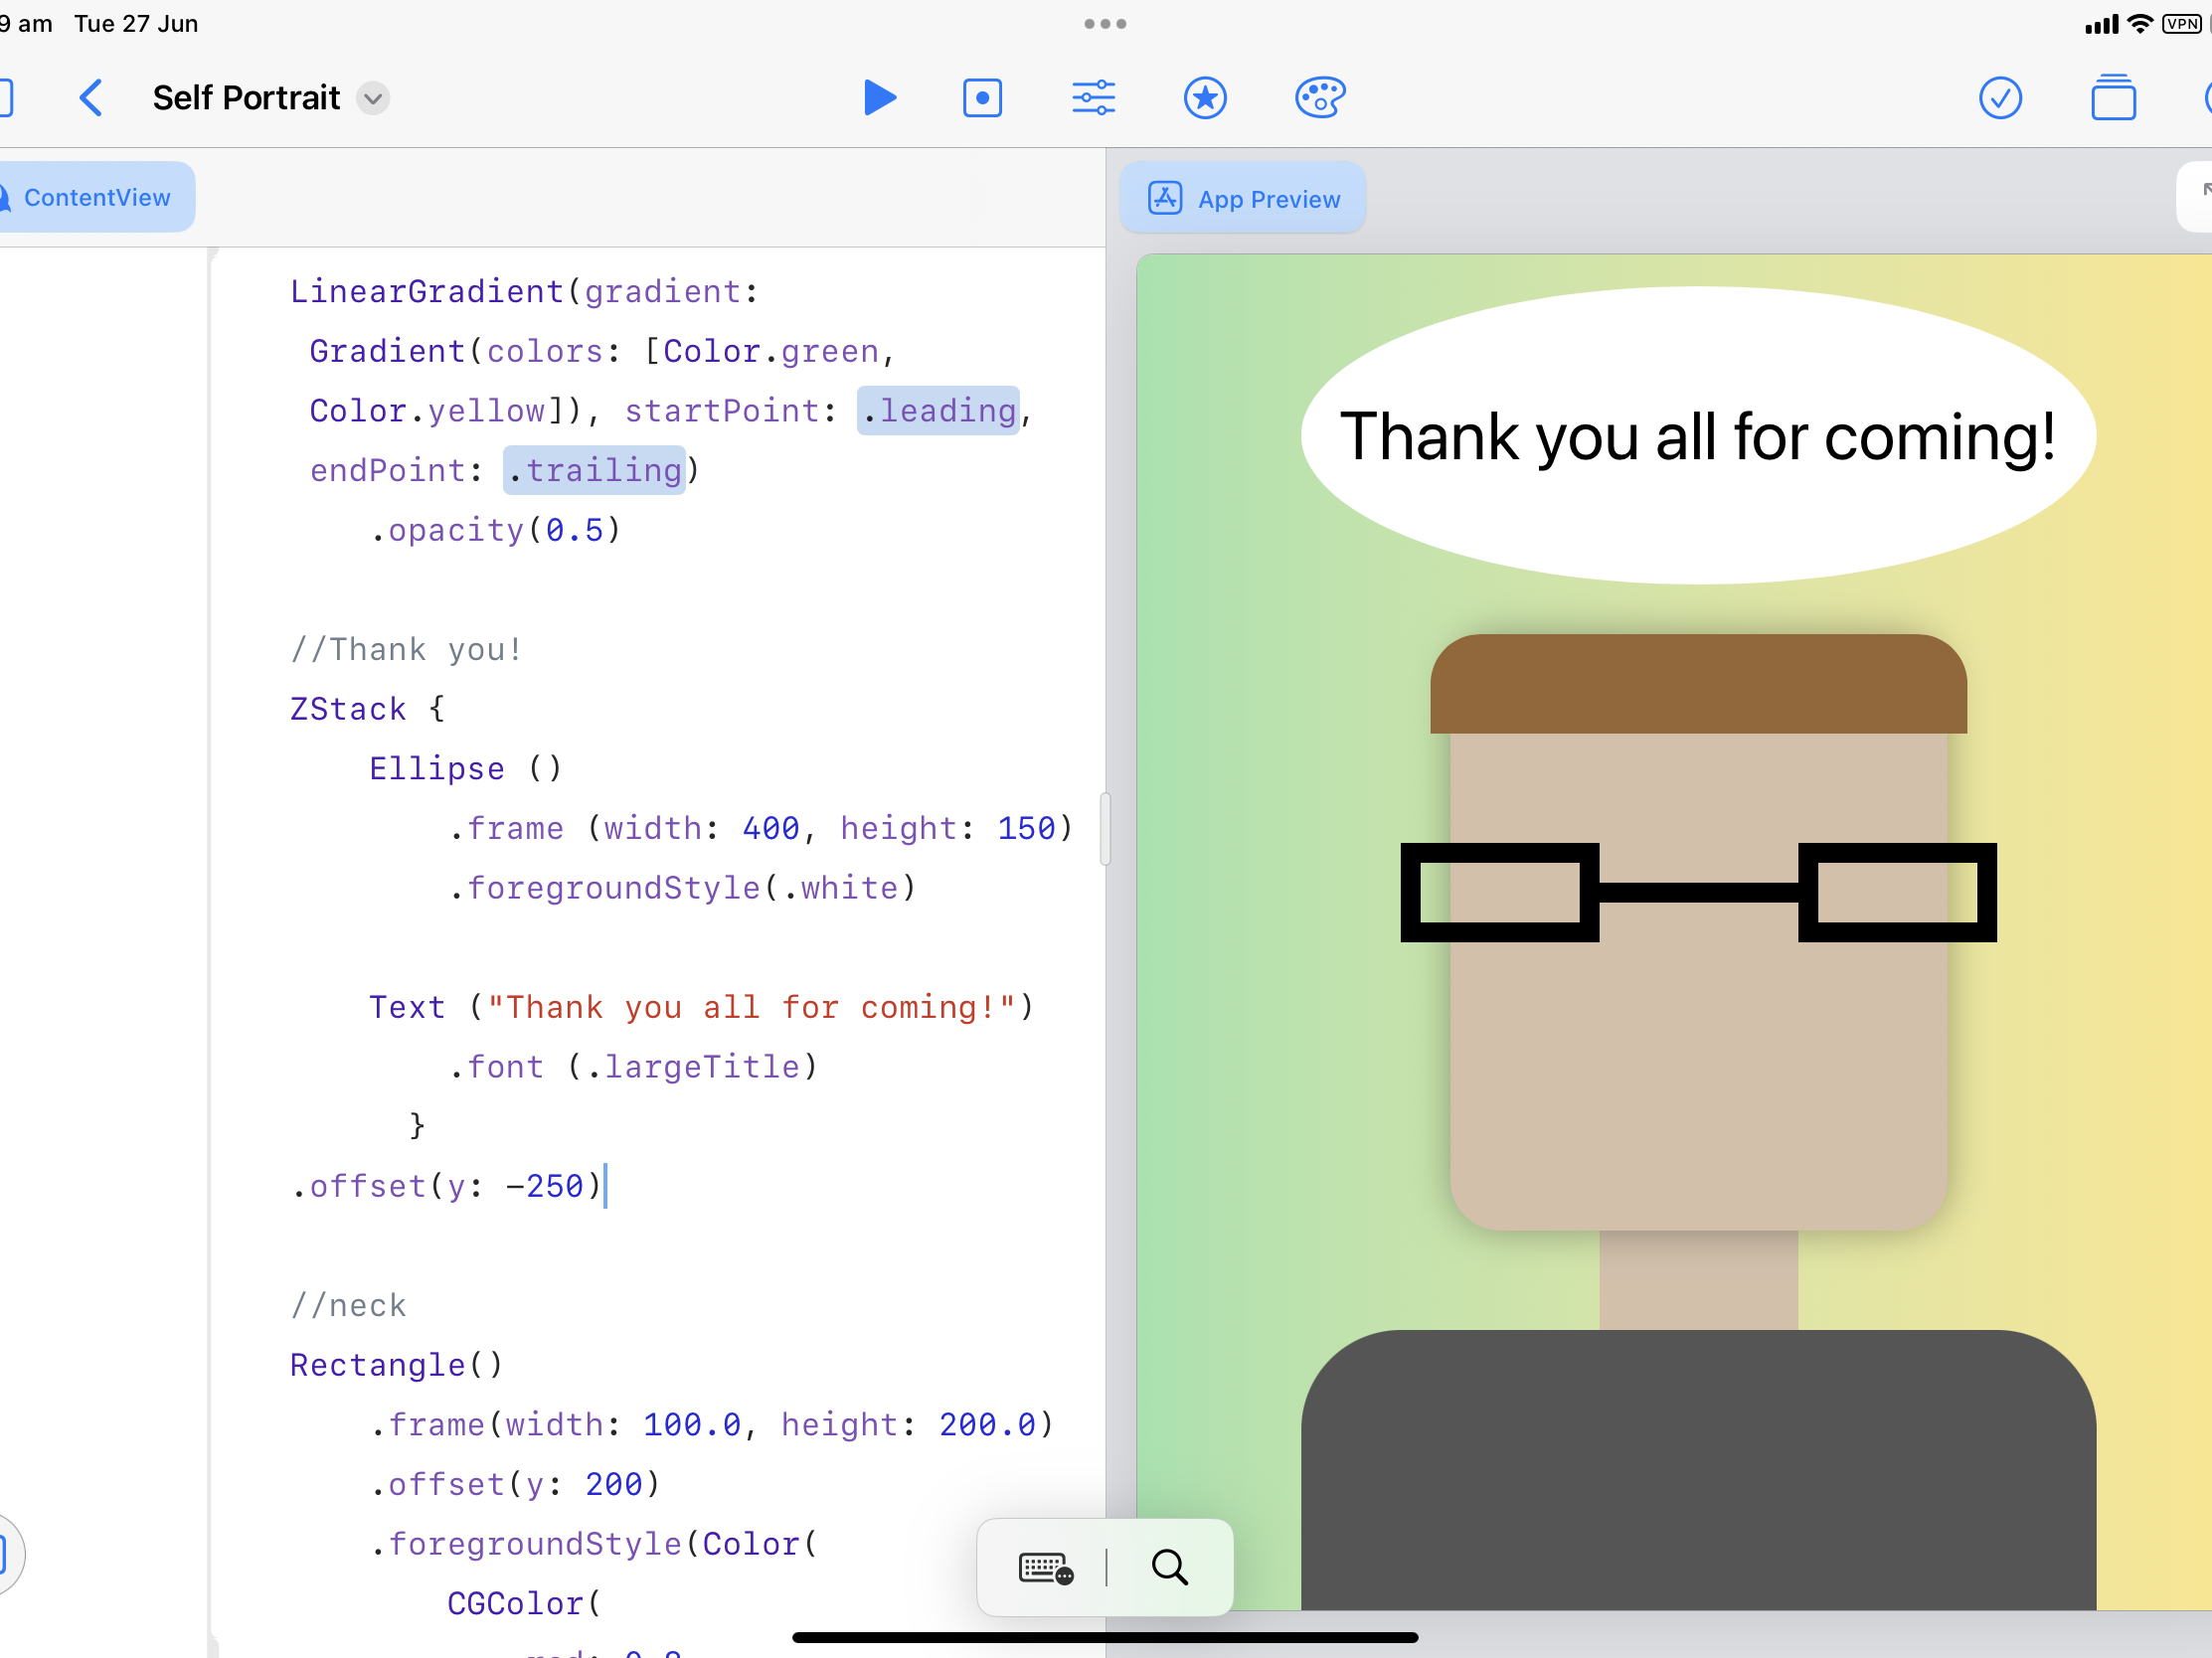 A screenshot of Swift Playgrounds, next to pic of a man wearing dark framed glasses, with the text "Thank you all for coming